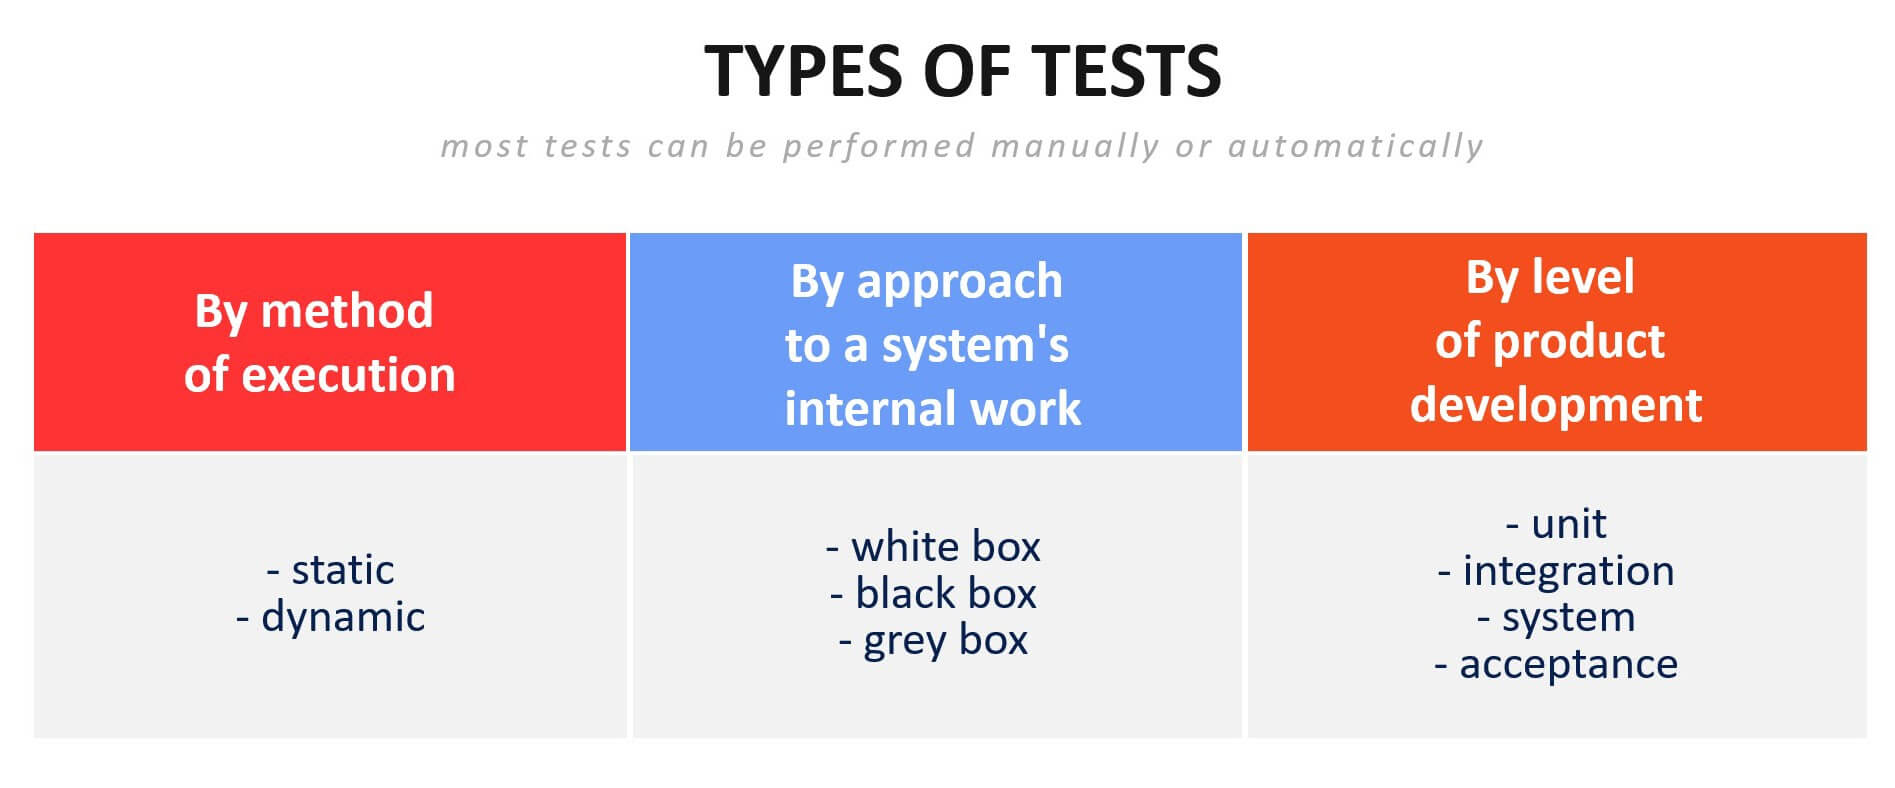 Types of Manual & Automated Tests